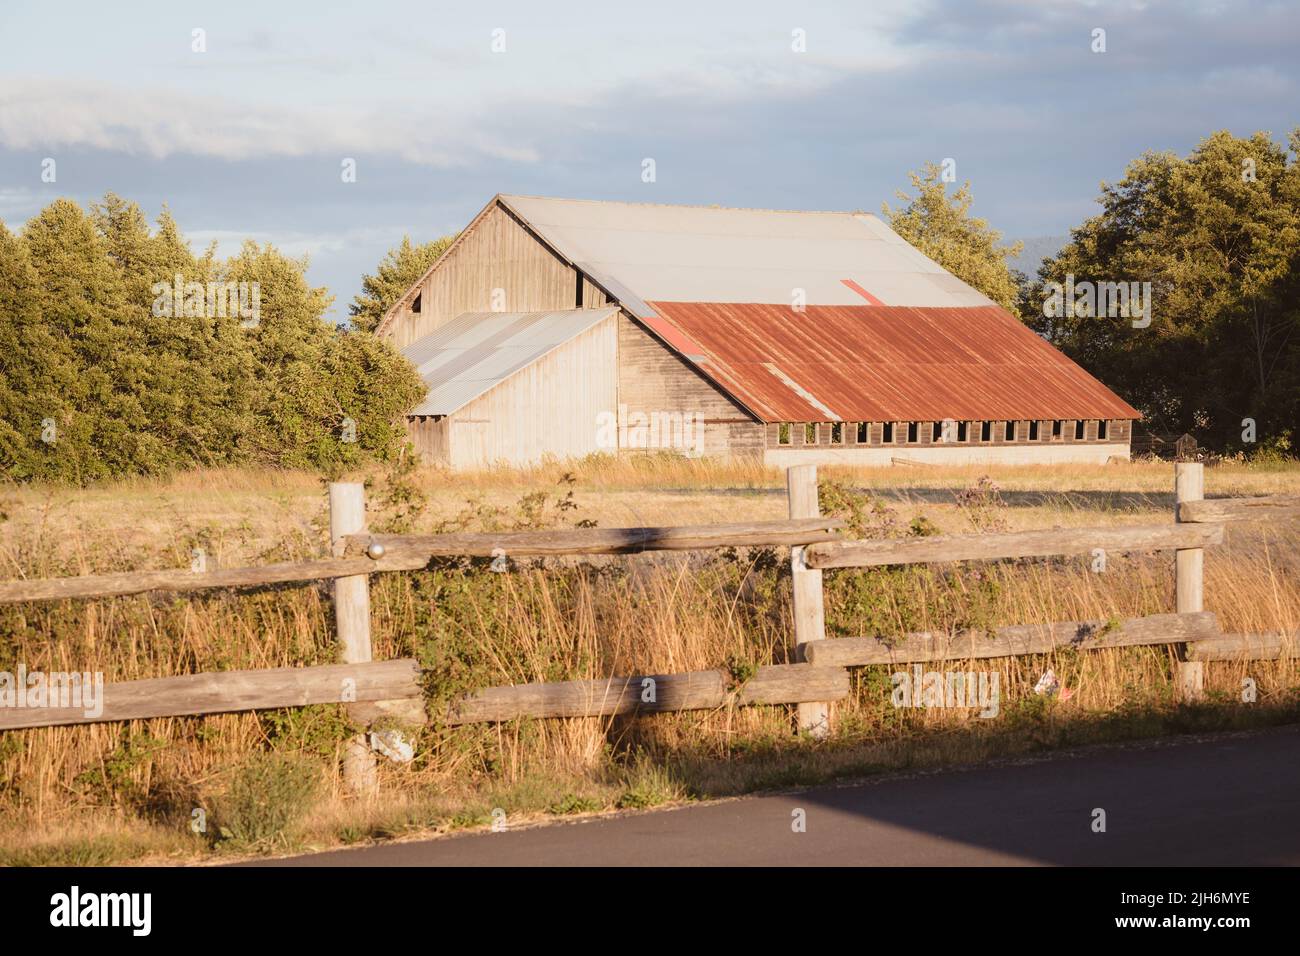 Rustic Barn on Farm with Wooden Fence Stock Photo